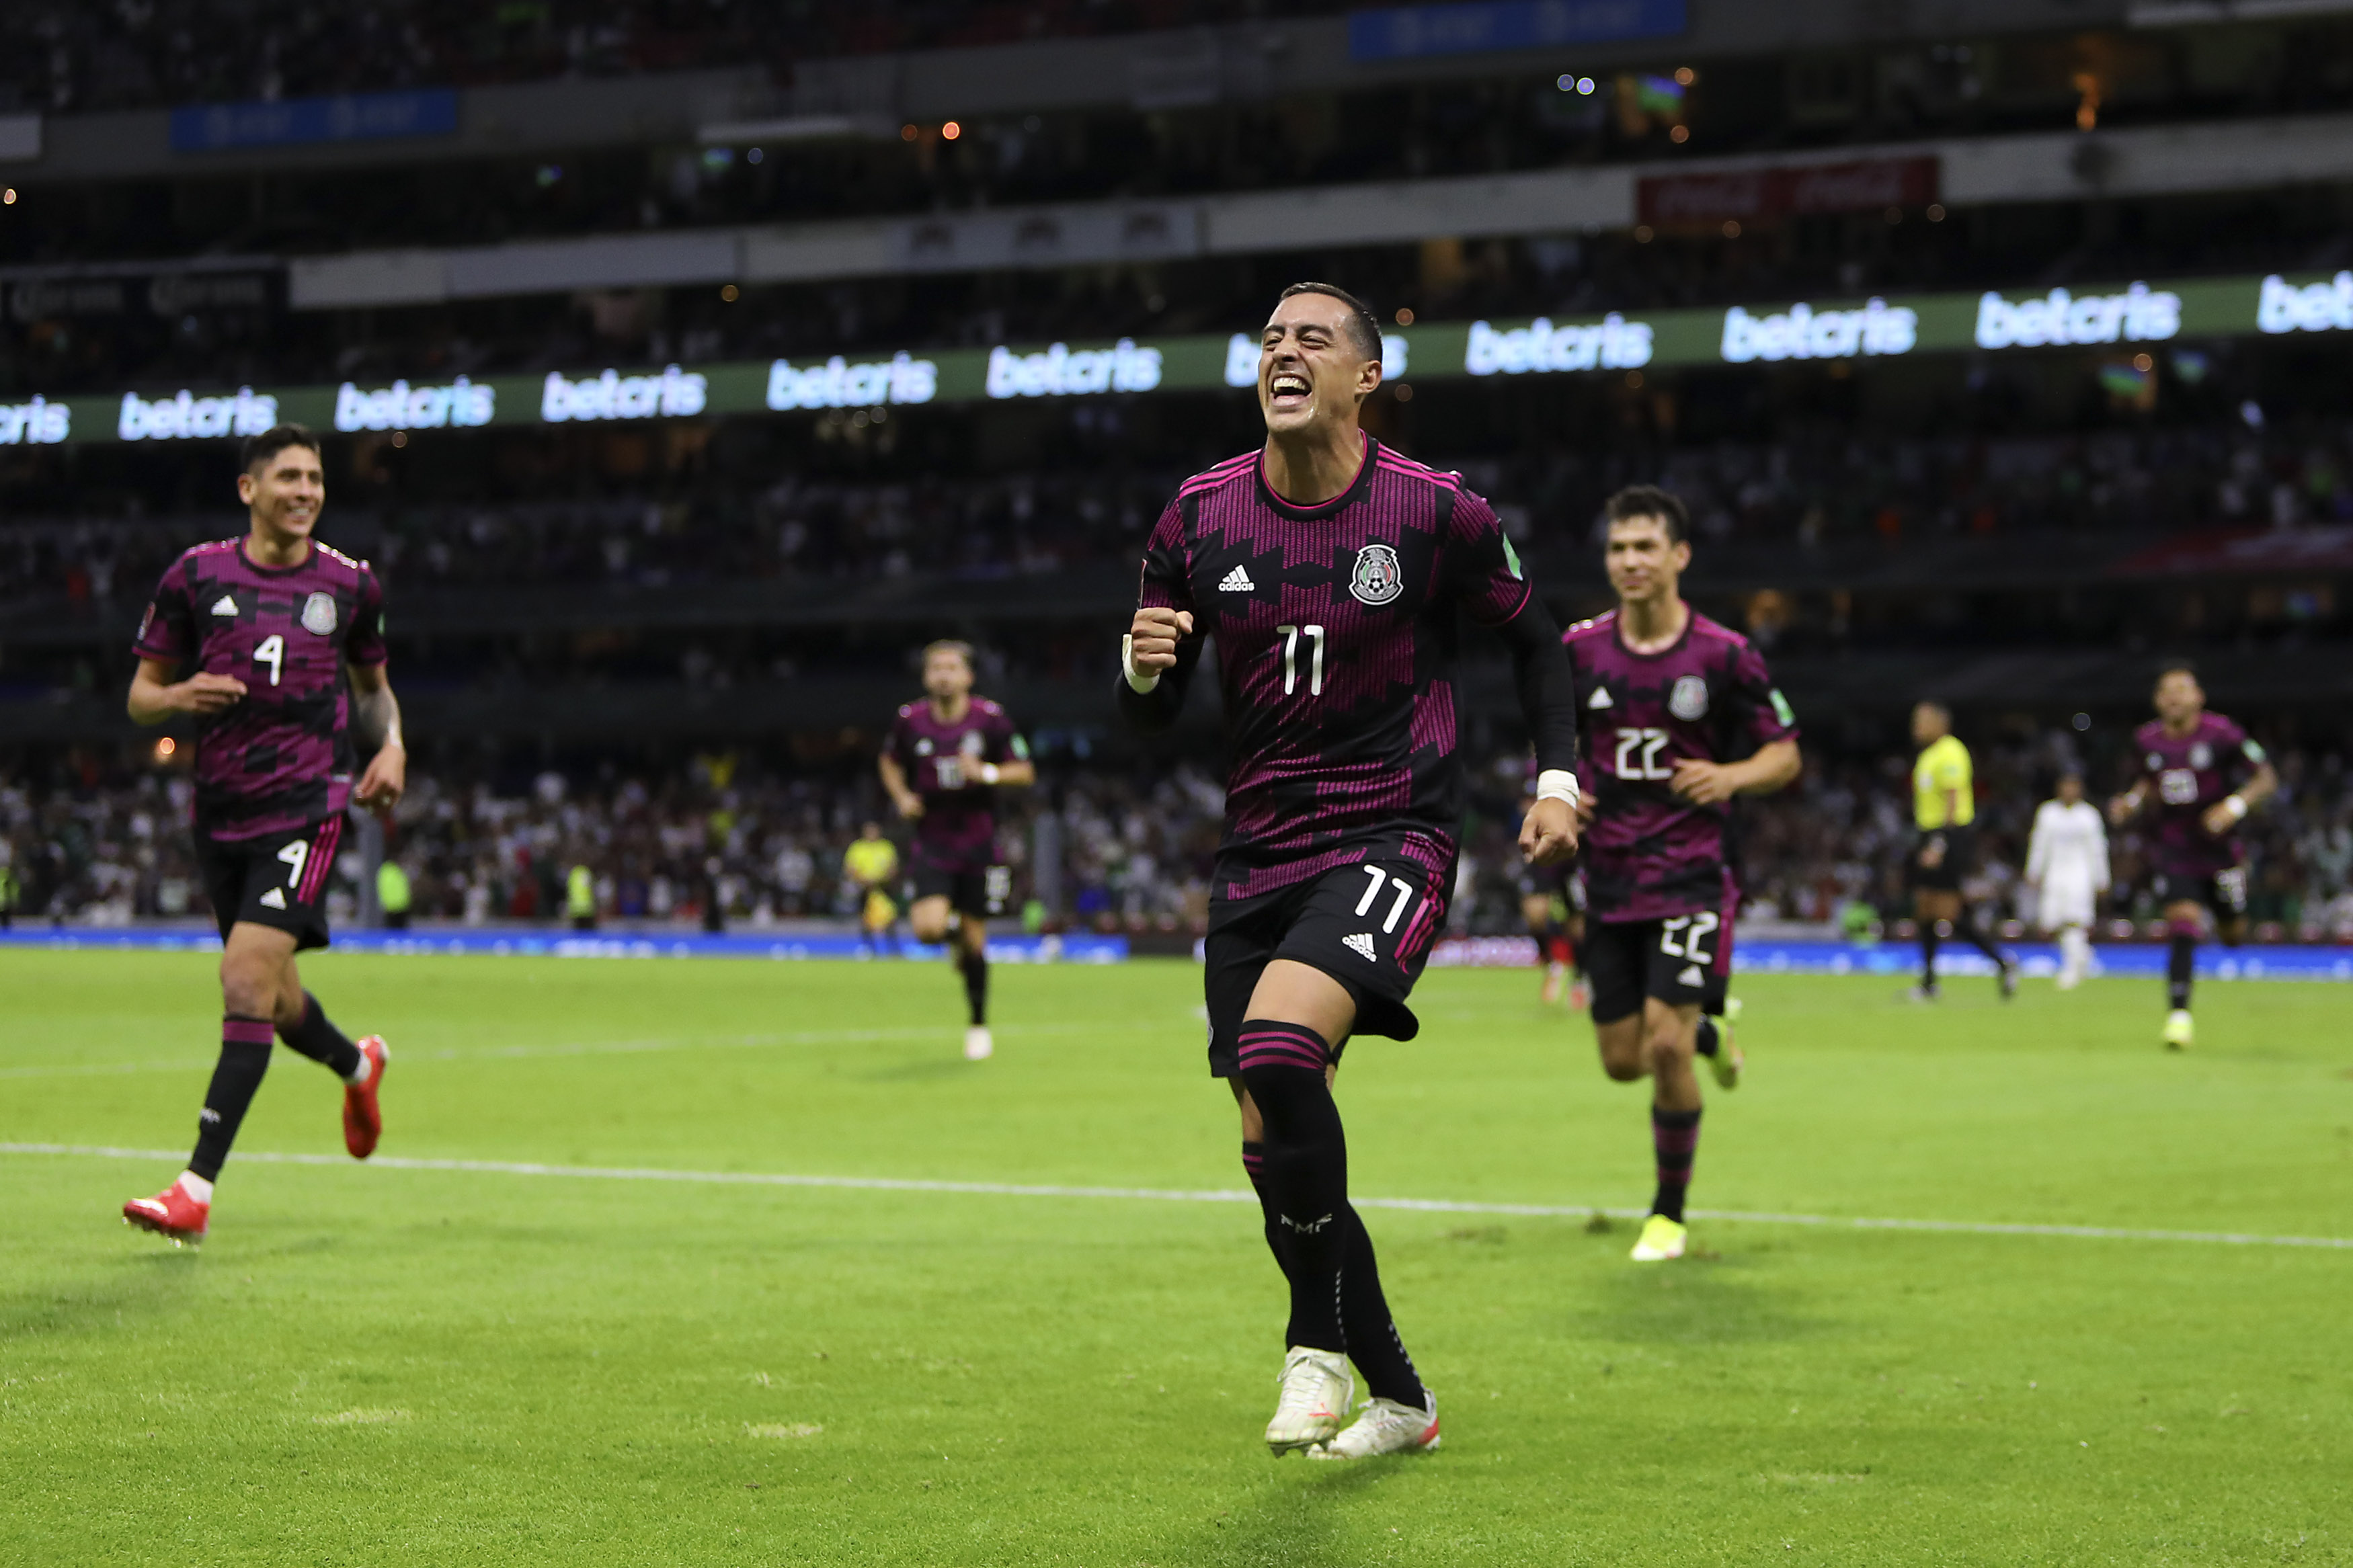 Mexico's Funes Mori celebrates after scoring against Honduras in the FIFA 2022 World Cup Qualifiers, Photo: @miseleccionmx